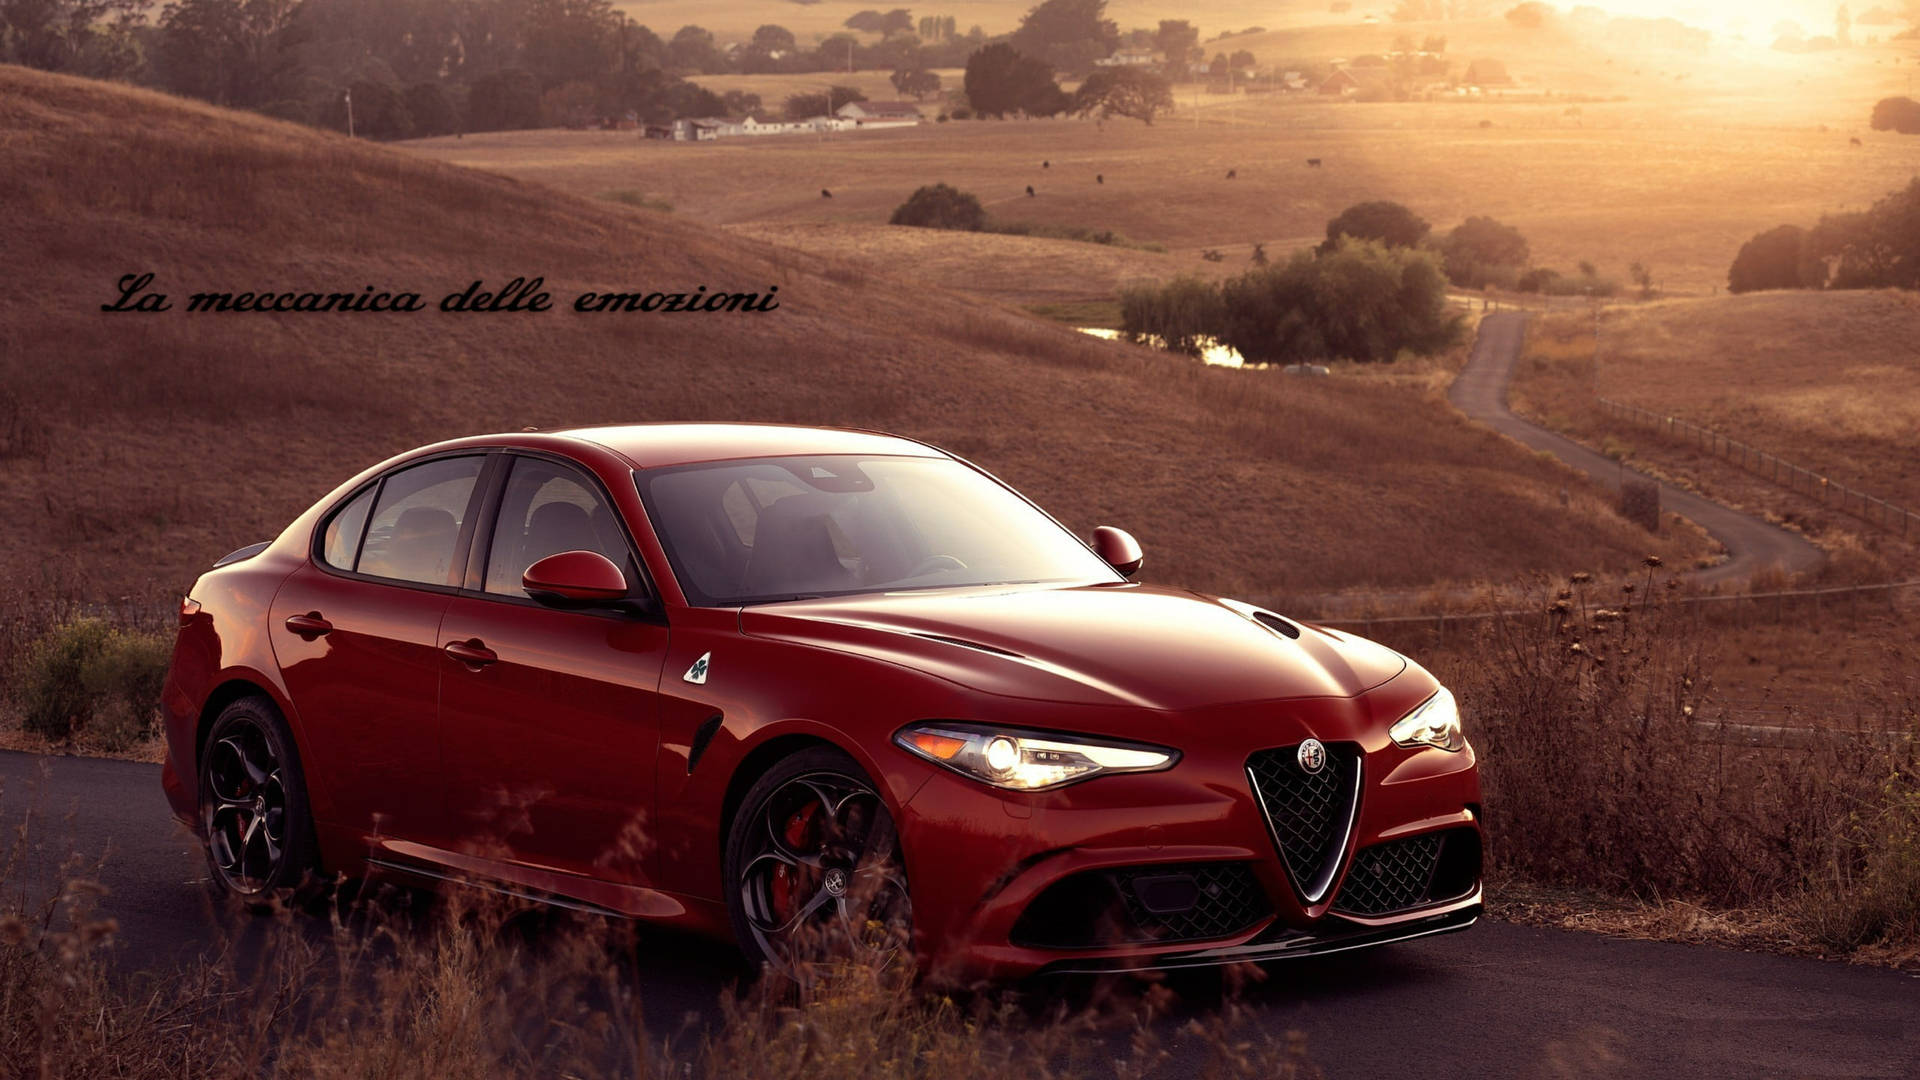 Red Alfa Romeo Giulia on road with bright sunset wallpaper.